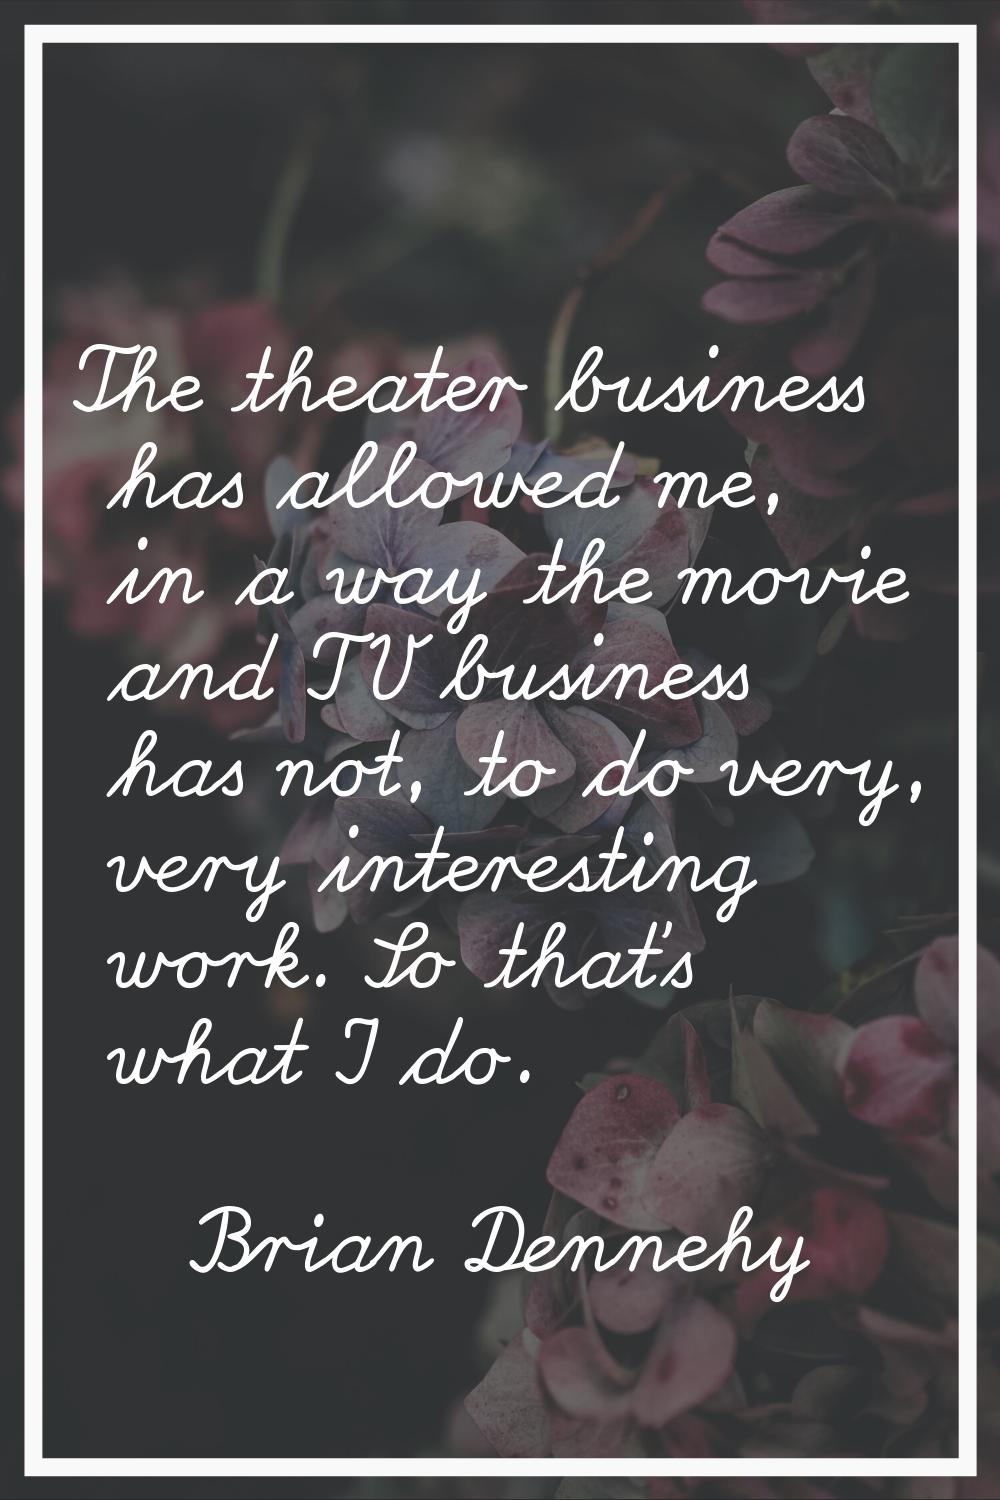 The theater business has allowed me, in a way the movie and TV business has not, to do very, very i